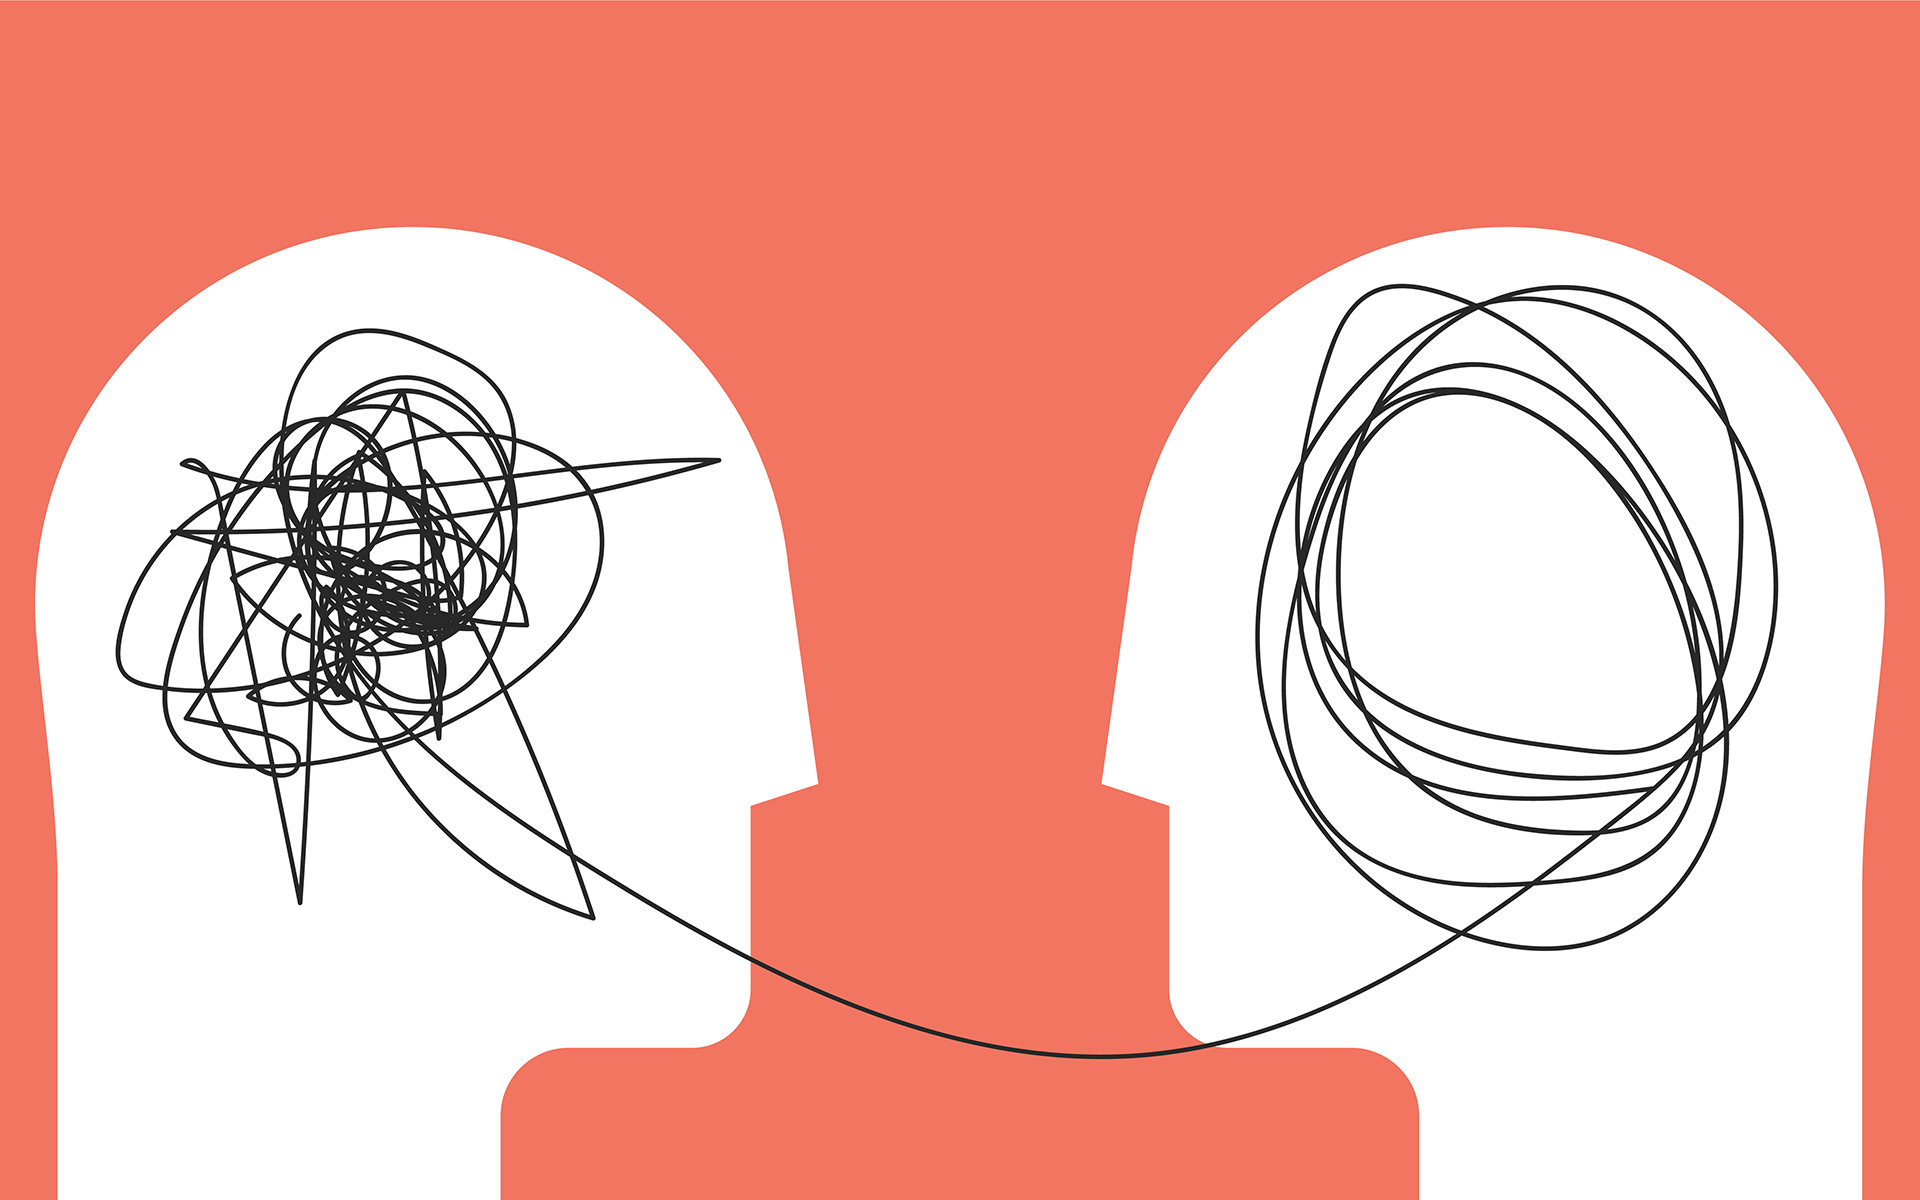 Illustration of two white silhouettes of heads facing one another on an orange background. In one head there is a scrambled line that leads to a neatly coiled line in the other.